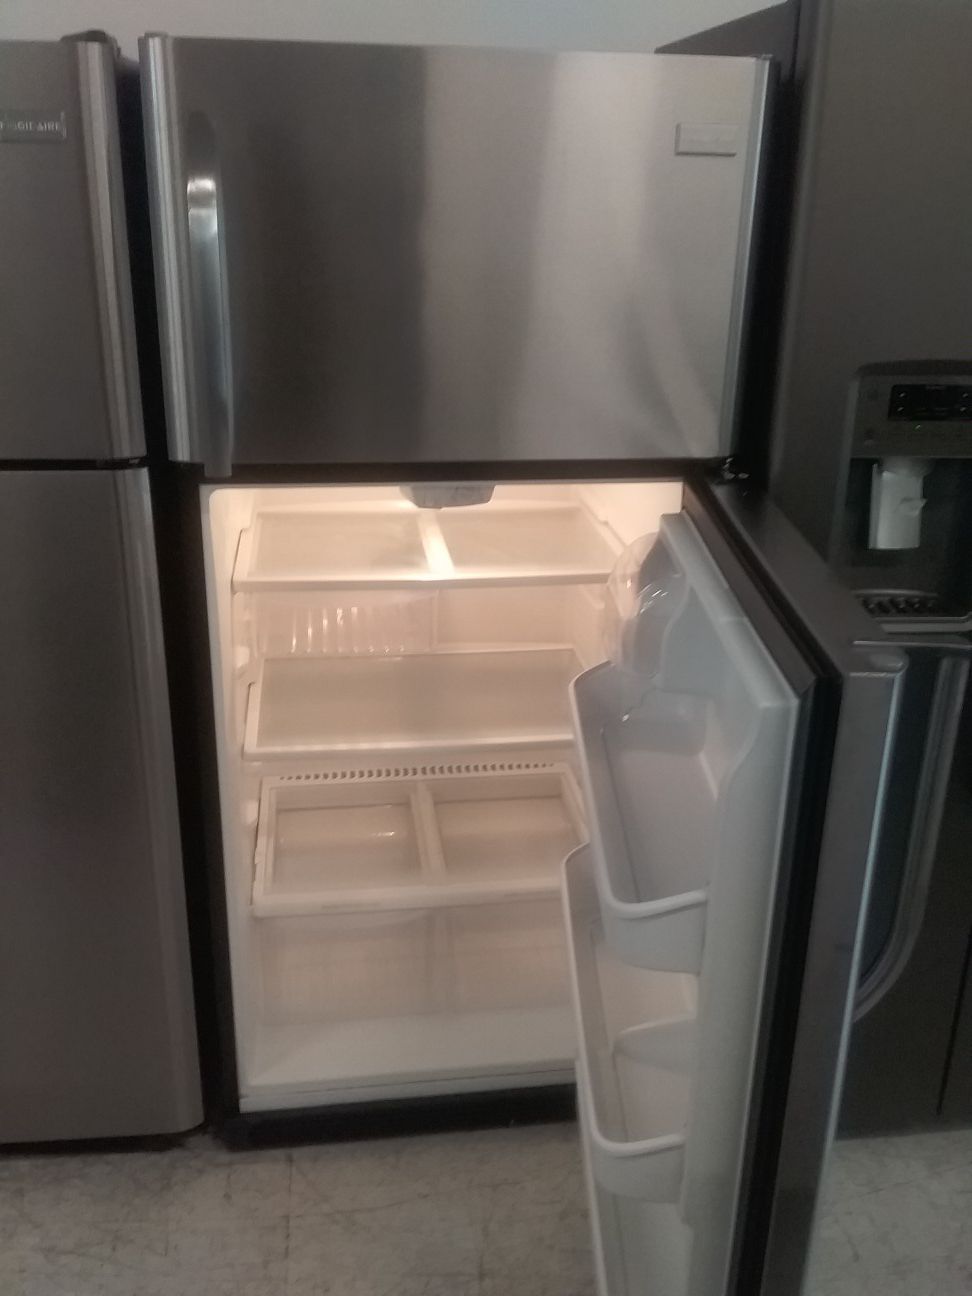 Frigidaire top and bottom stainless steel refrigerator used good condition 90days warranty